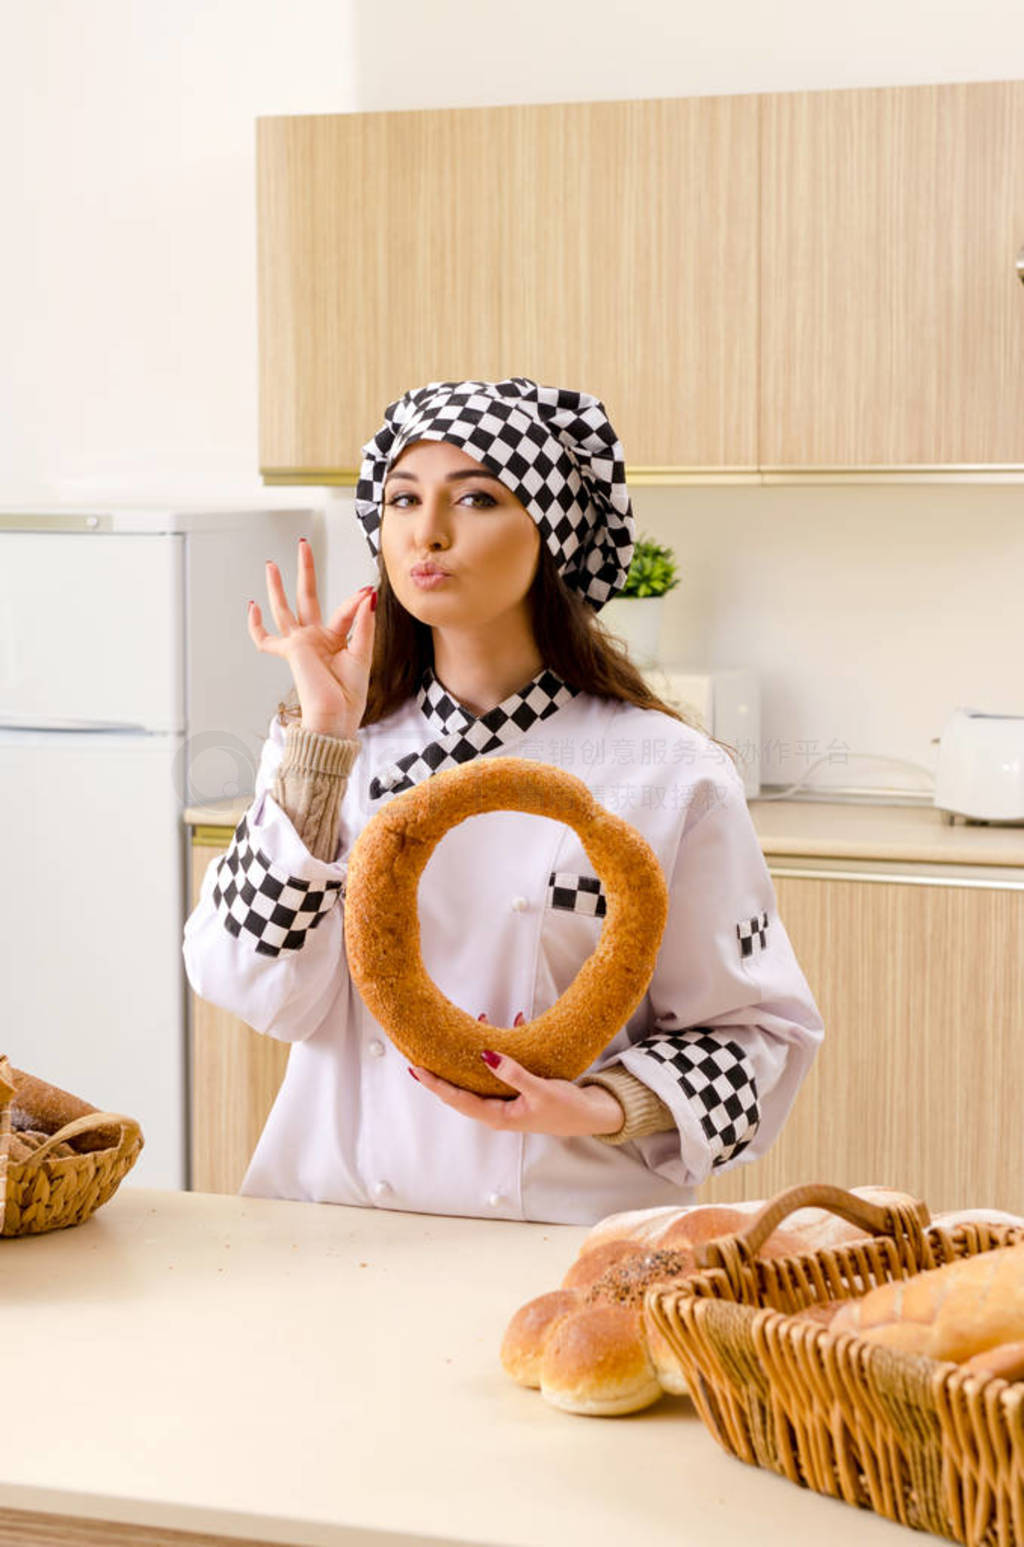 Young female baker working in kitchen